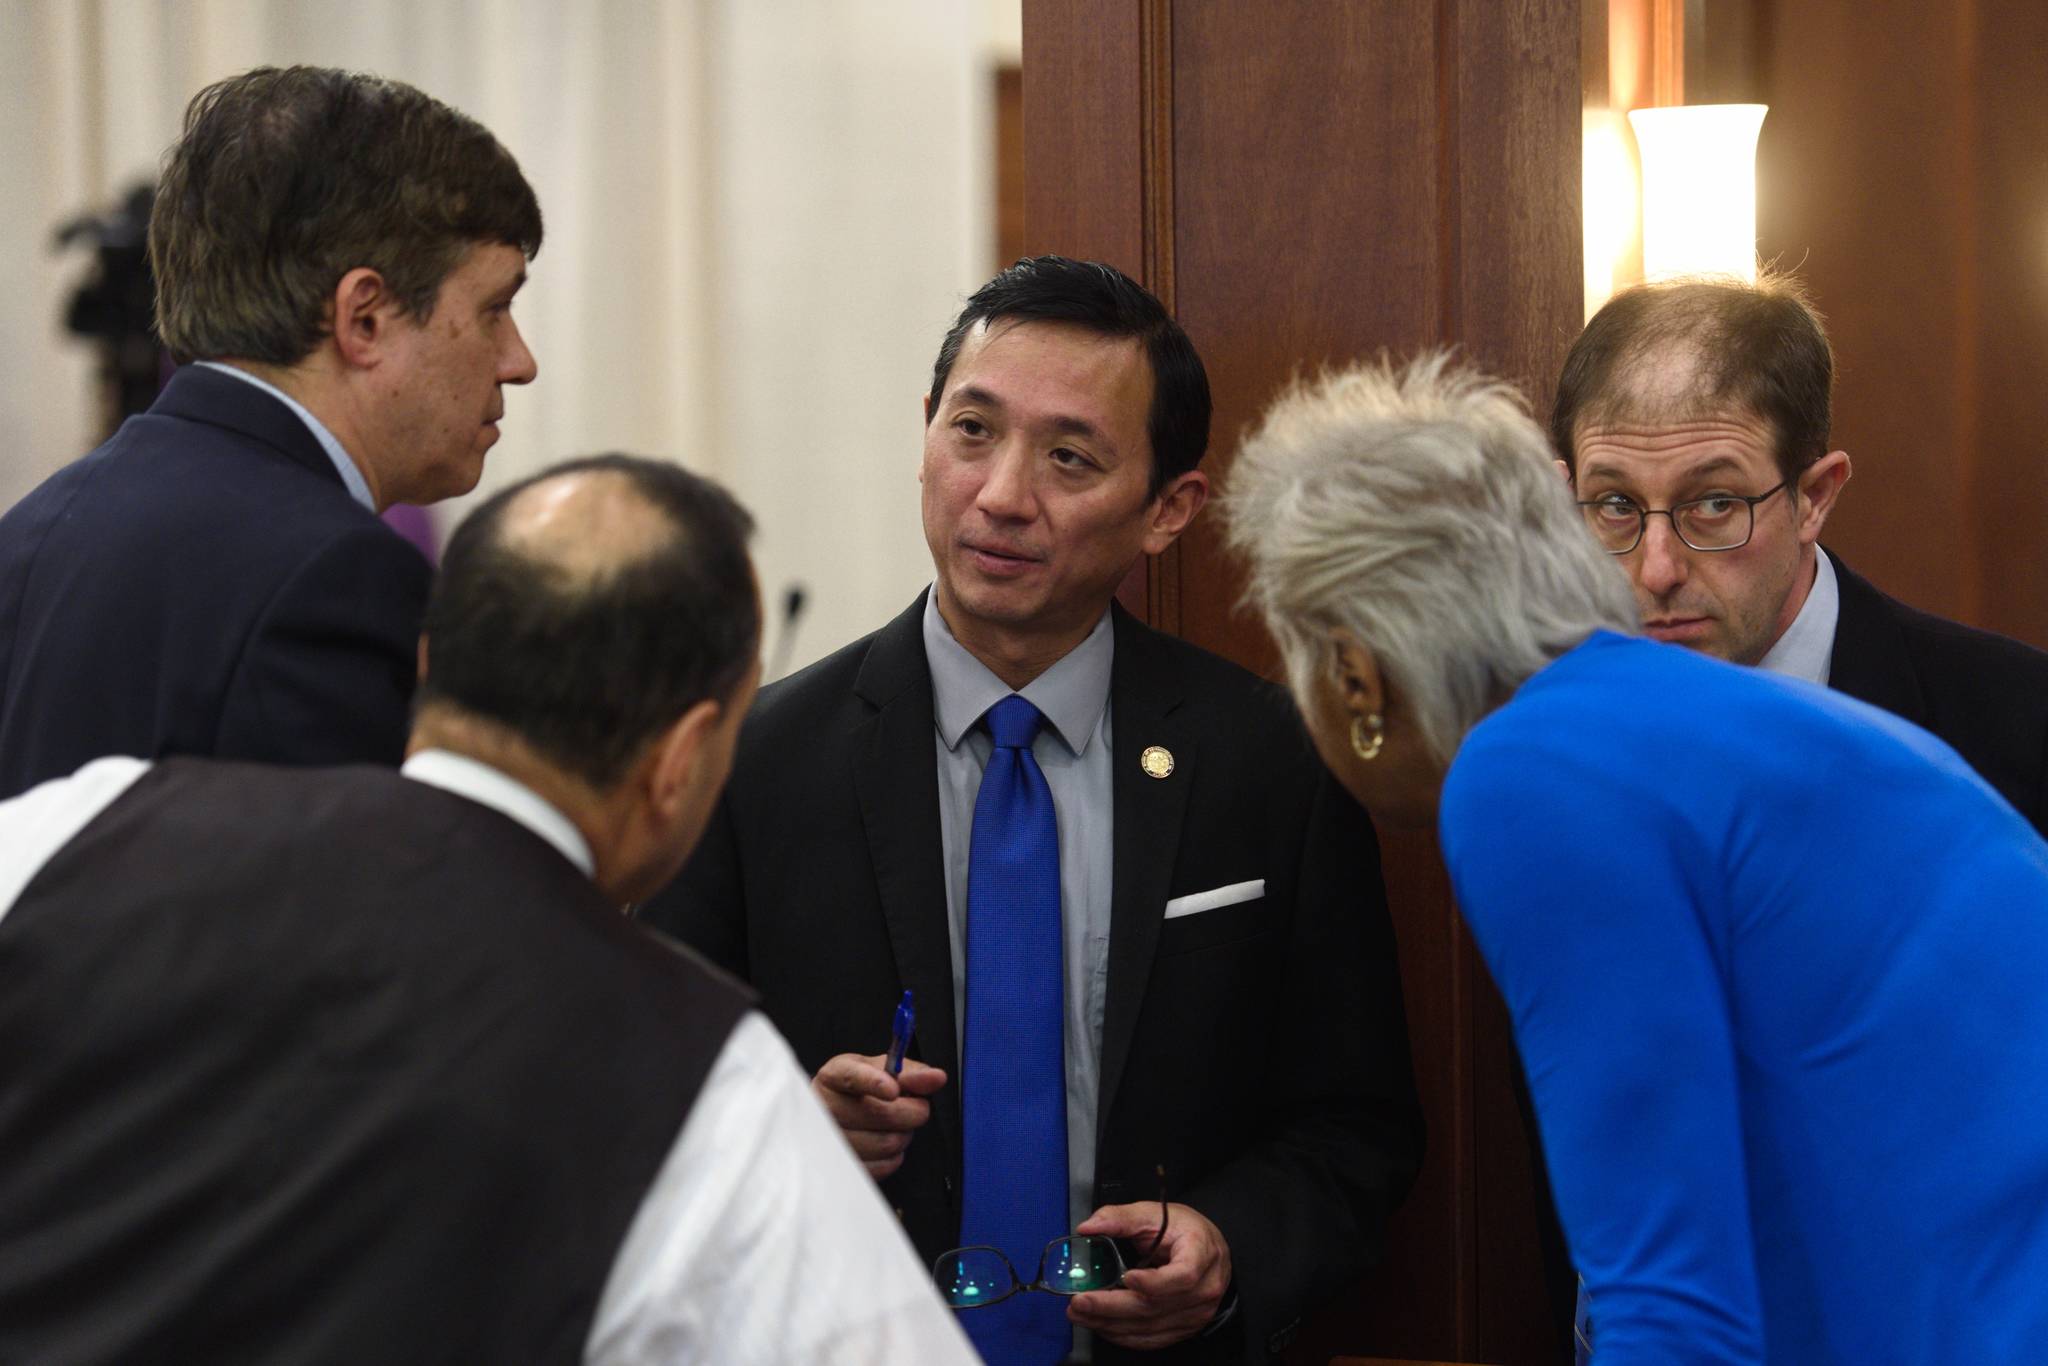 Senate Minority members caucus during debate on the size of the Alaska Permanent Fund dividend in the Senate on Tuesday, June 4, 2019. (Michael Penn | Juneau Empire)